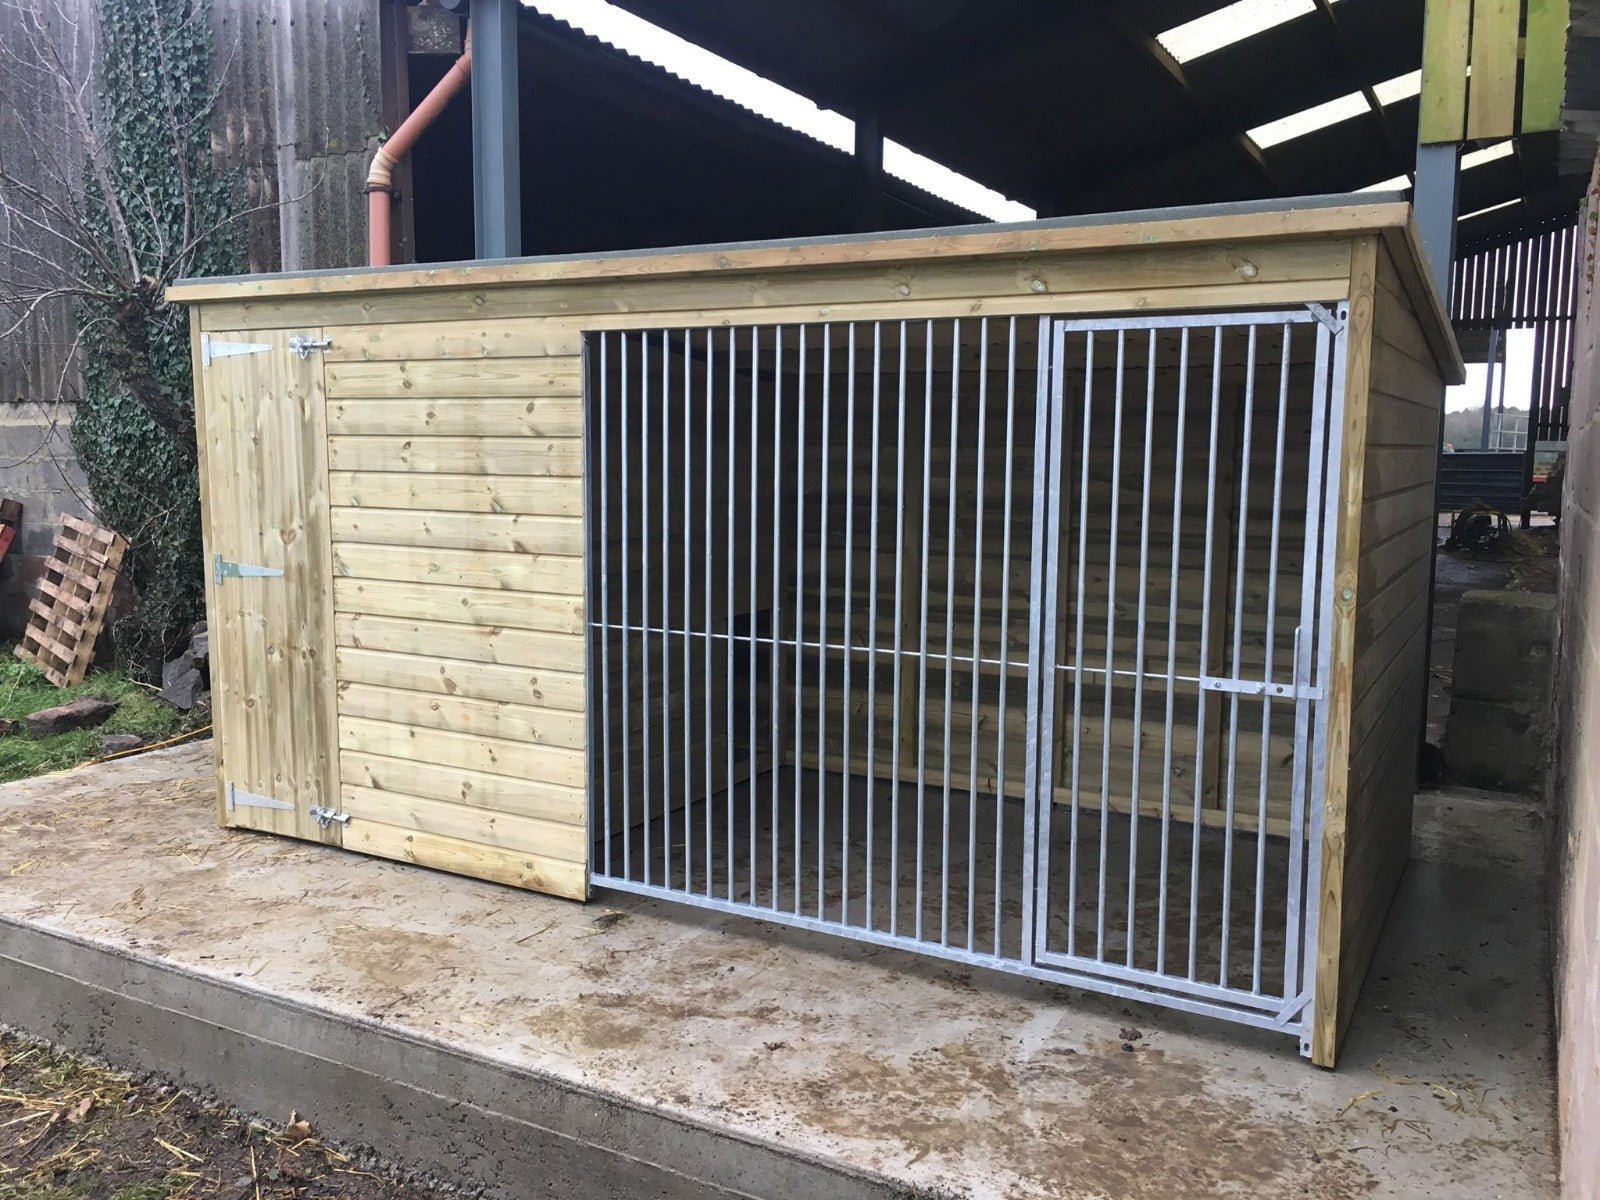 Chesterfield Dog Kennel 8ft (wide) x 5ft (depth) x 5'7ft (high)